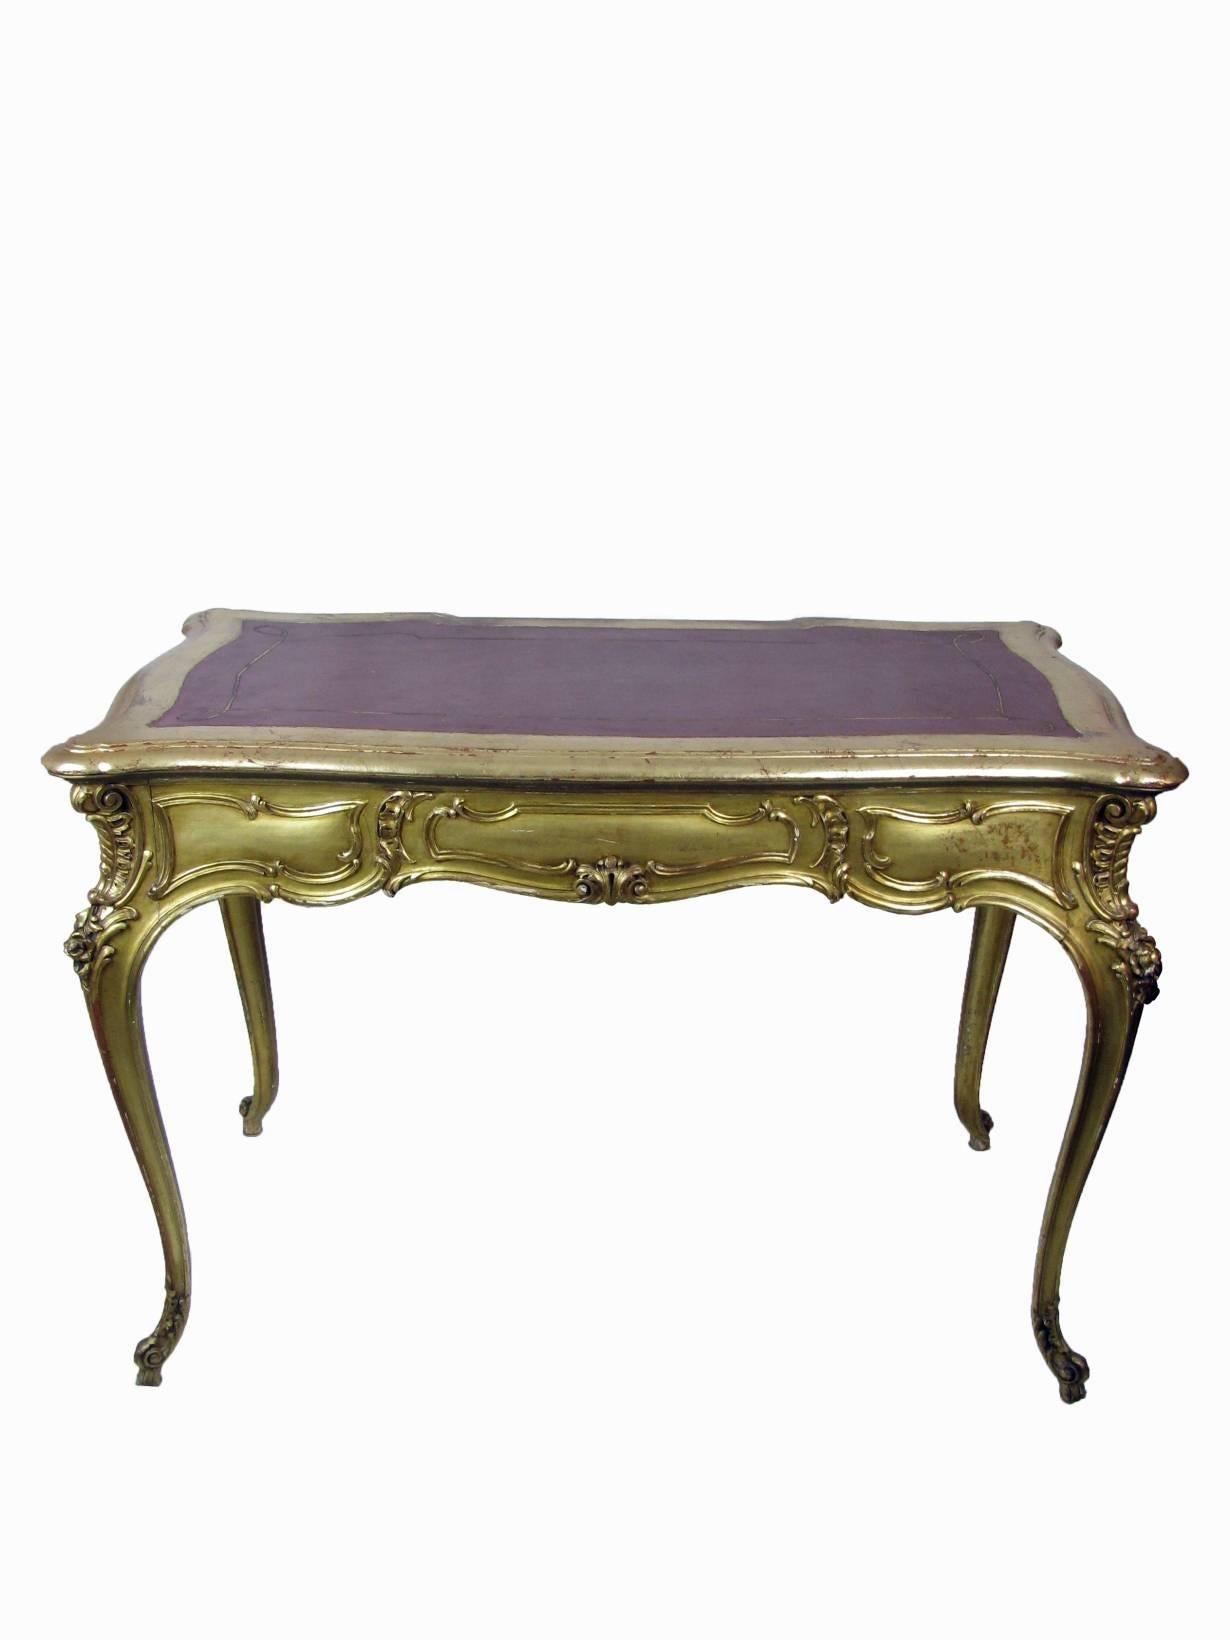 Mid-20th century carved and giltwood desk, Italian writing table, Louis XV style, in good condition, coming from a Milanese private residence. Red leather top and three drawers in the front, a wide, deep, central one, with a working lock and two